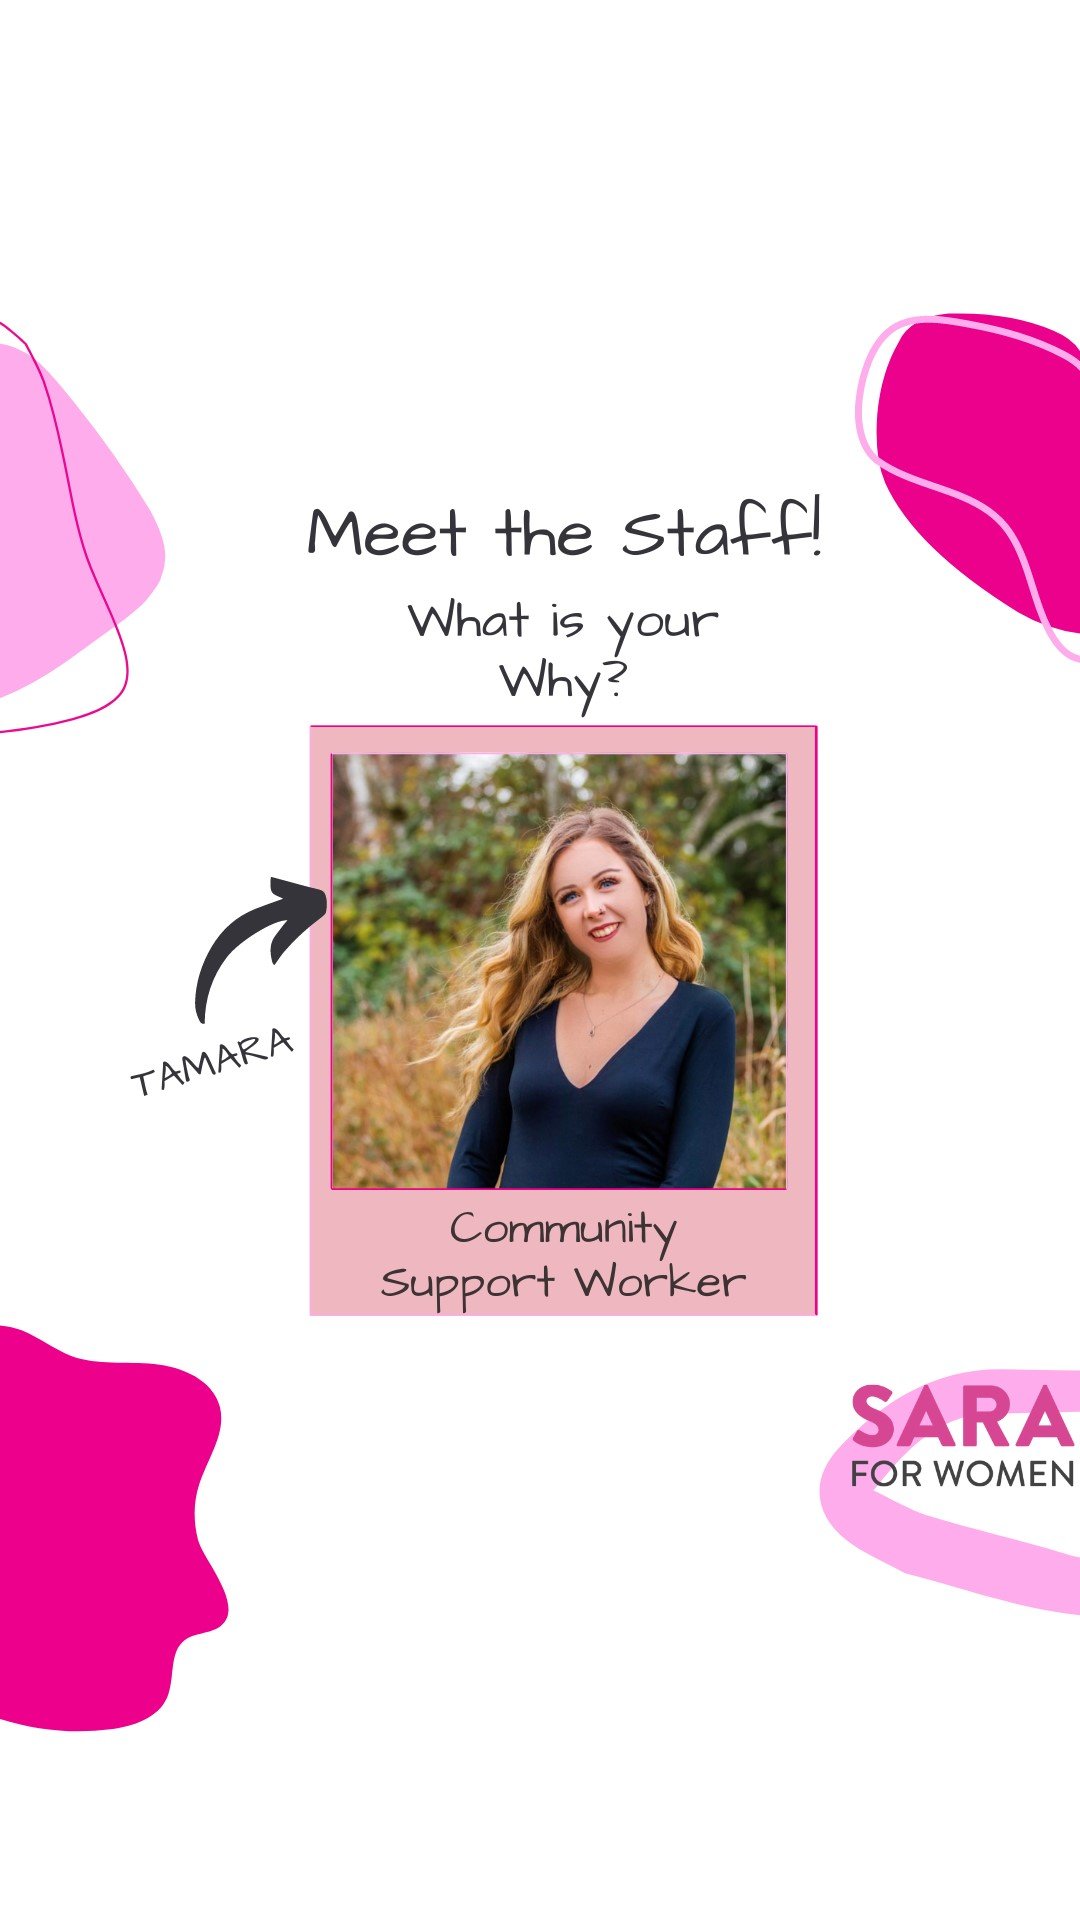 Hello everyone! We are excited to continue our segment called&quot; What is your Why?&quot;

Today, Tamara our Community Support Worker, shares her reason for dedicating her time to our organization. 

&ldquo;I have a passion for working with strong,